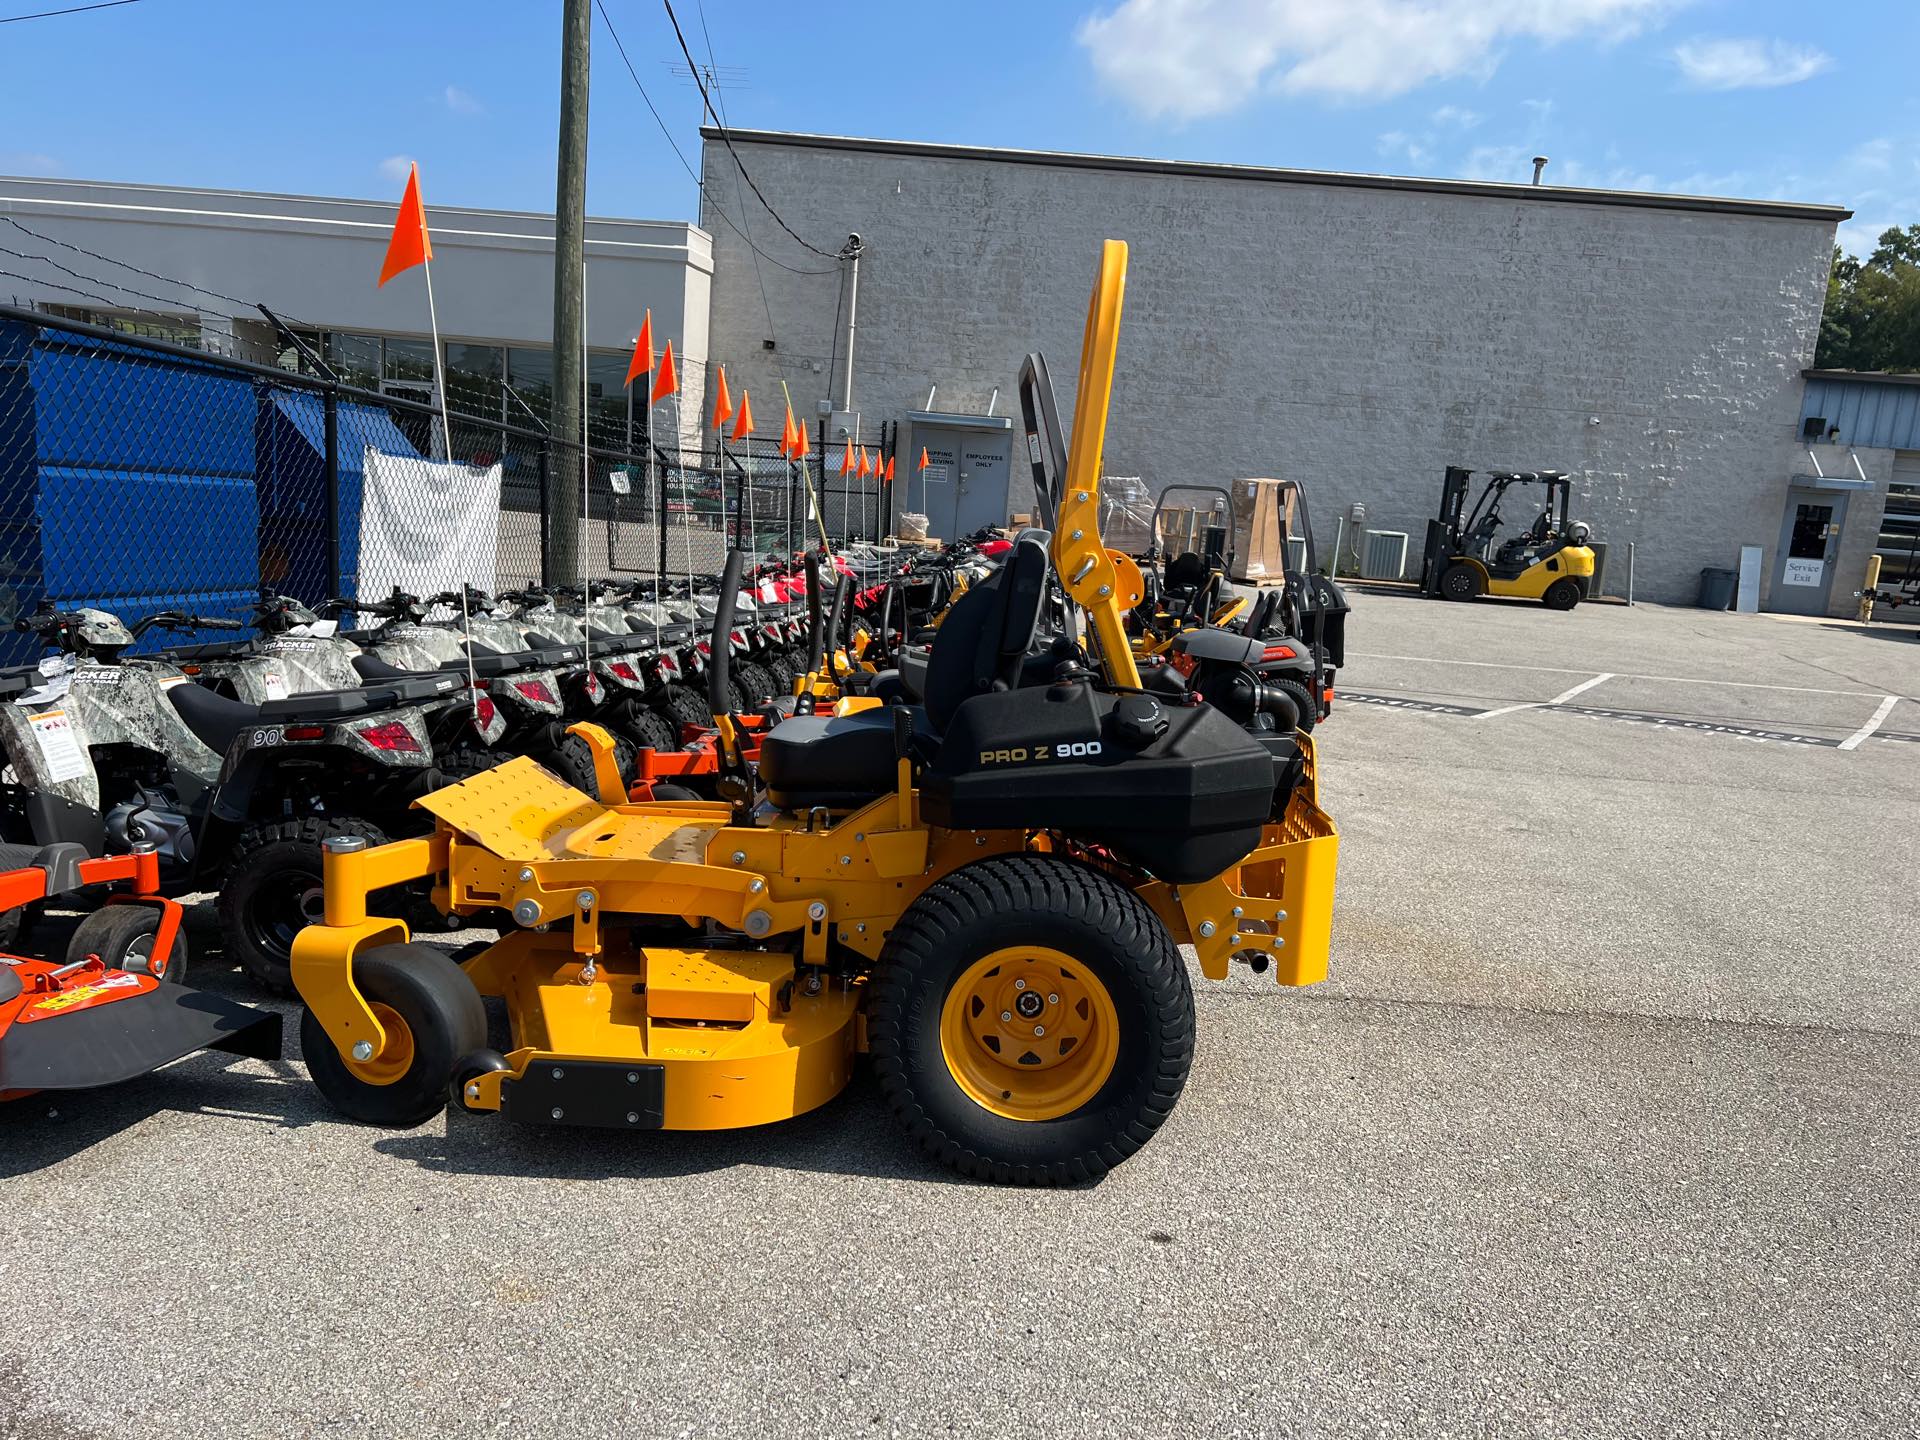 2022 Cub Cadet Commercial Zero Turn Mowers PRO Z 960 L KW at Knoxville Powersports